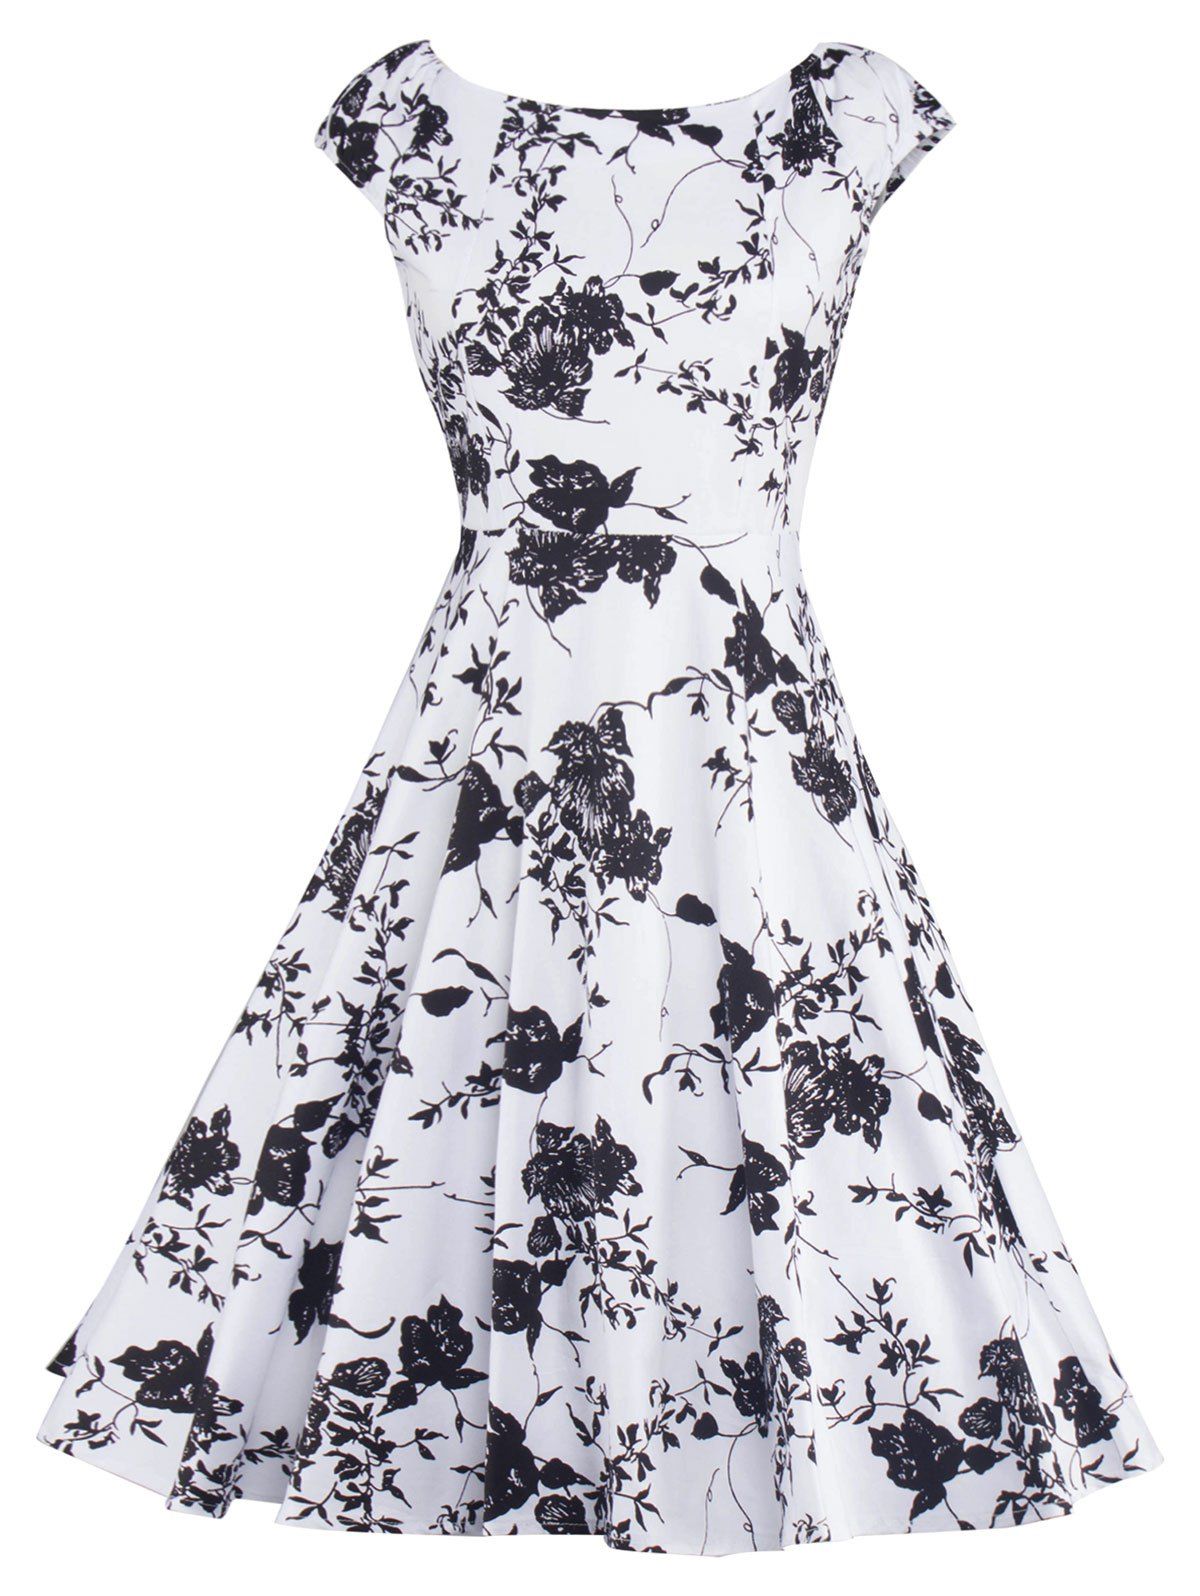 [41% OFF] 2021 Floral Print Vintage Swing Fit And Flare Dress In WHITE ...